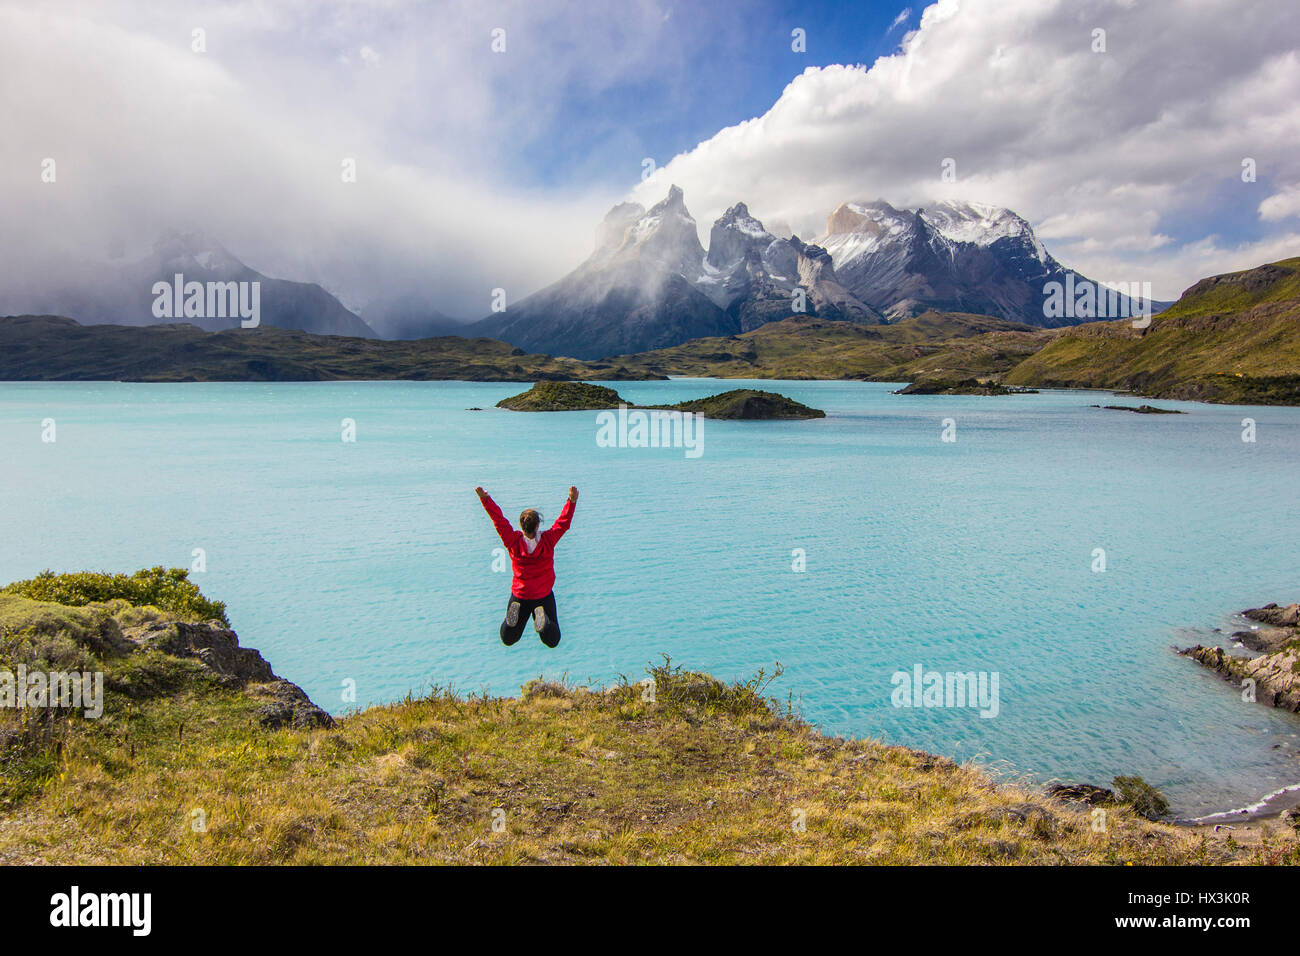 girl in red jacket with hands up jumping above lake in mountains Stock Photo